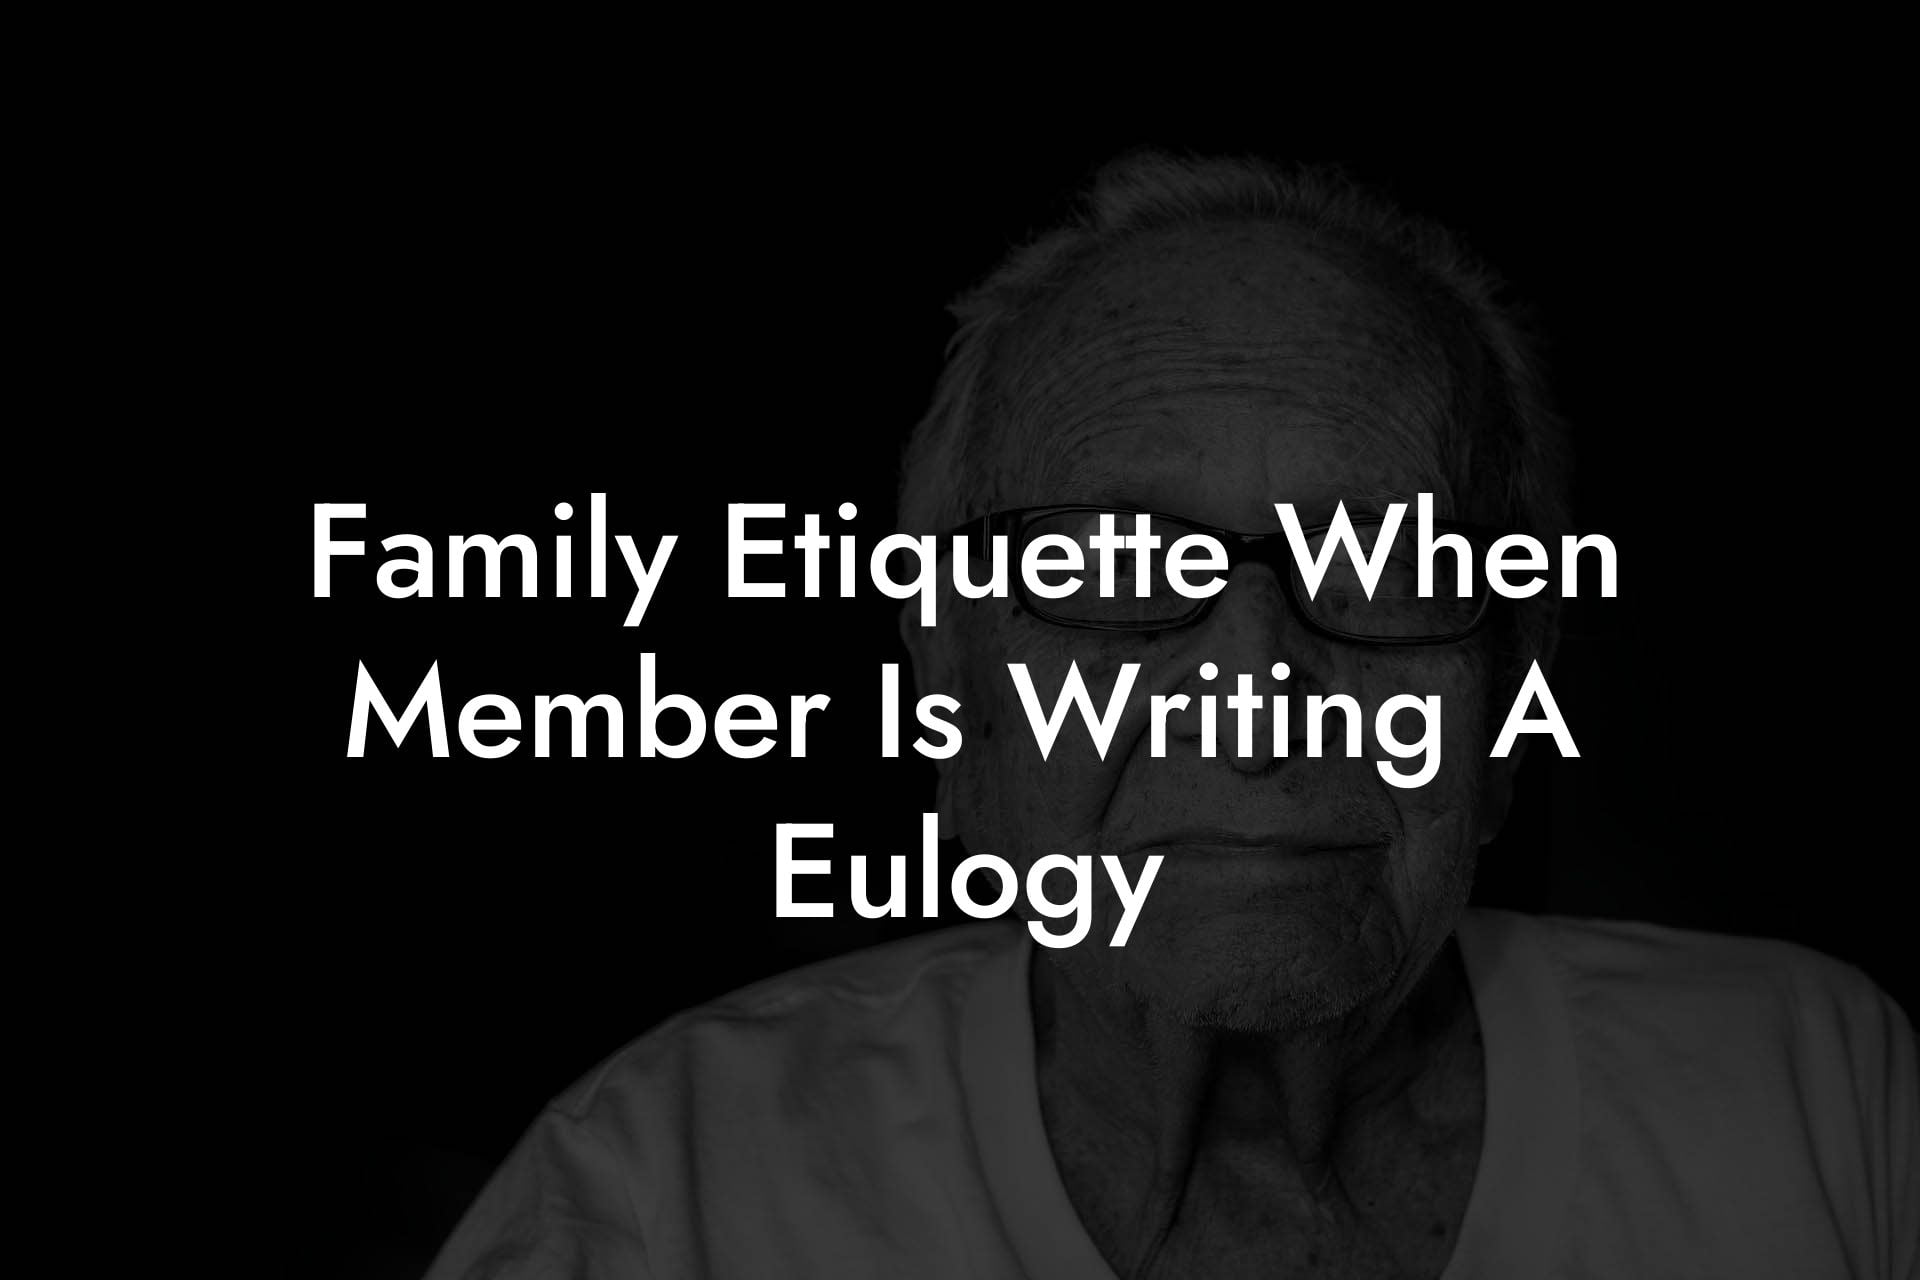 Family Etiquette When Member Is Writing A Eulogy